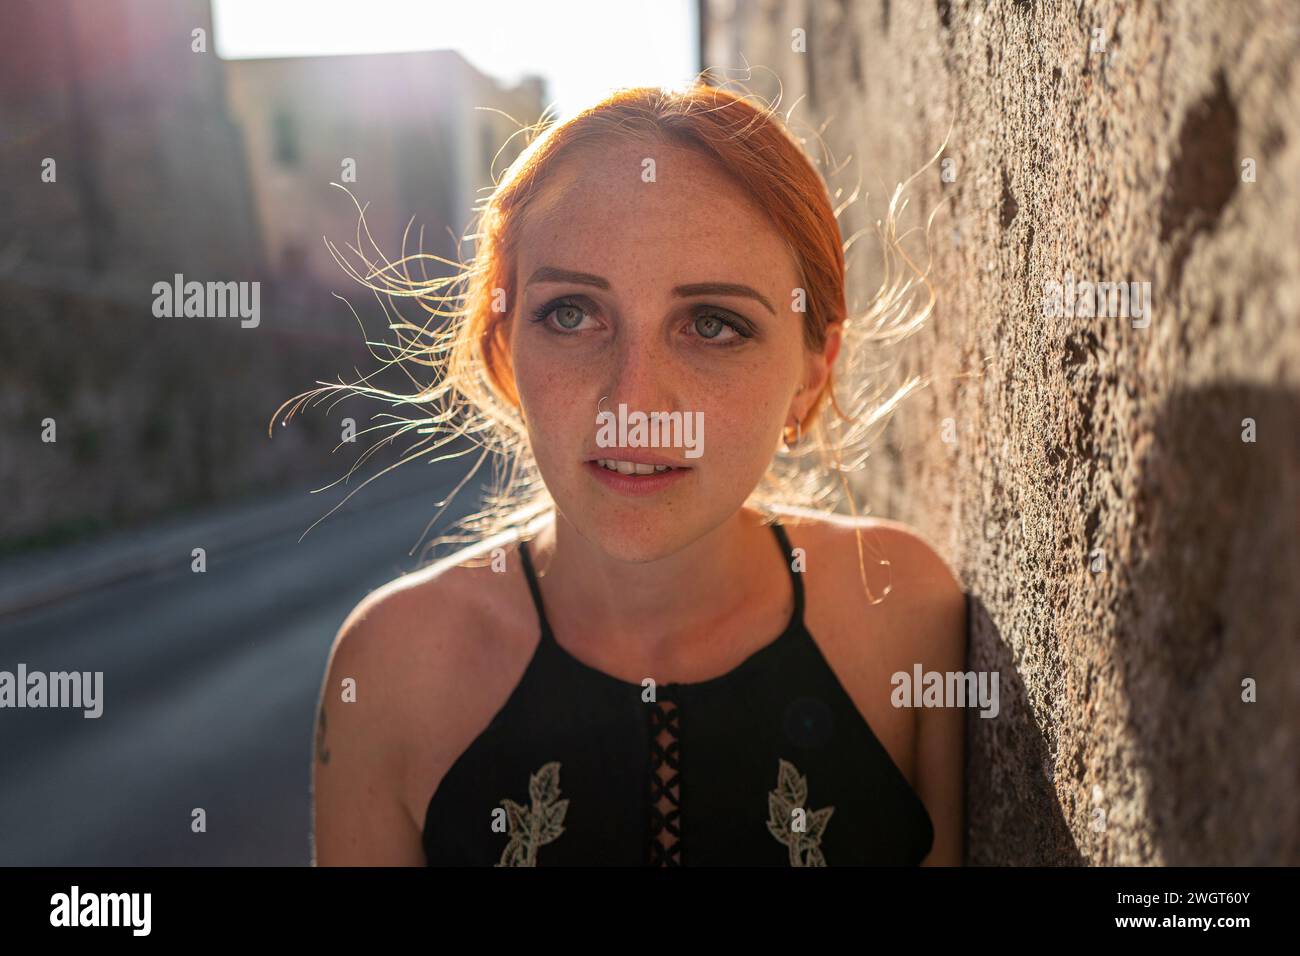 Young woman with red hair, Rome, Italy Stock Photo